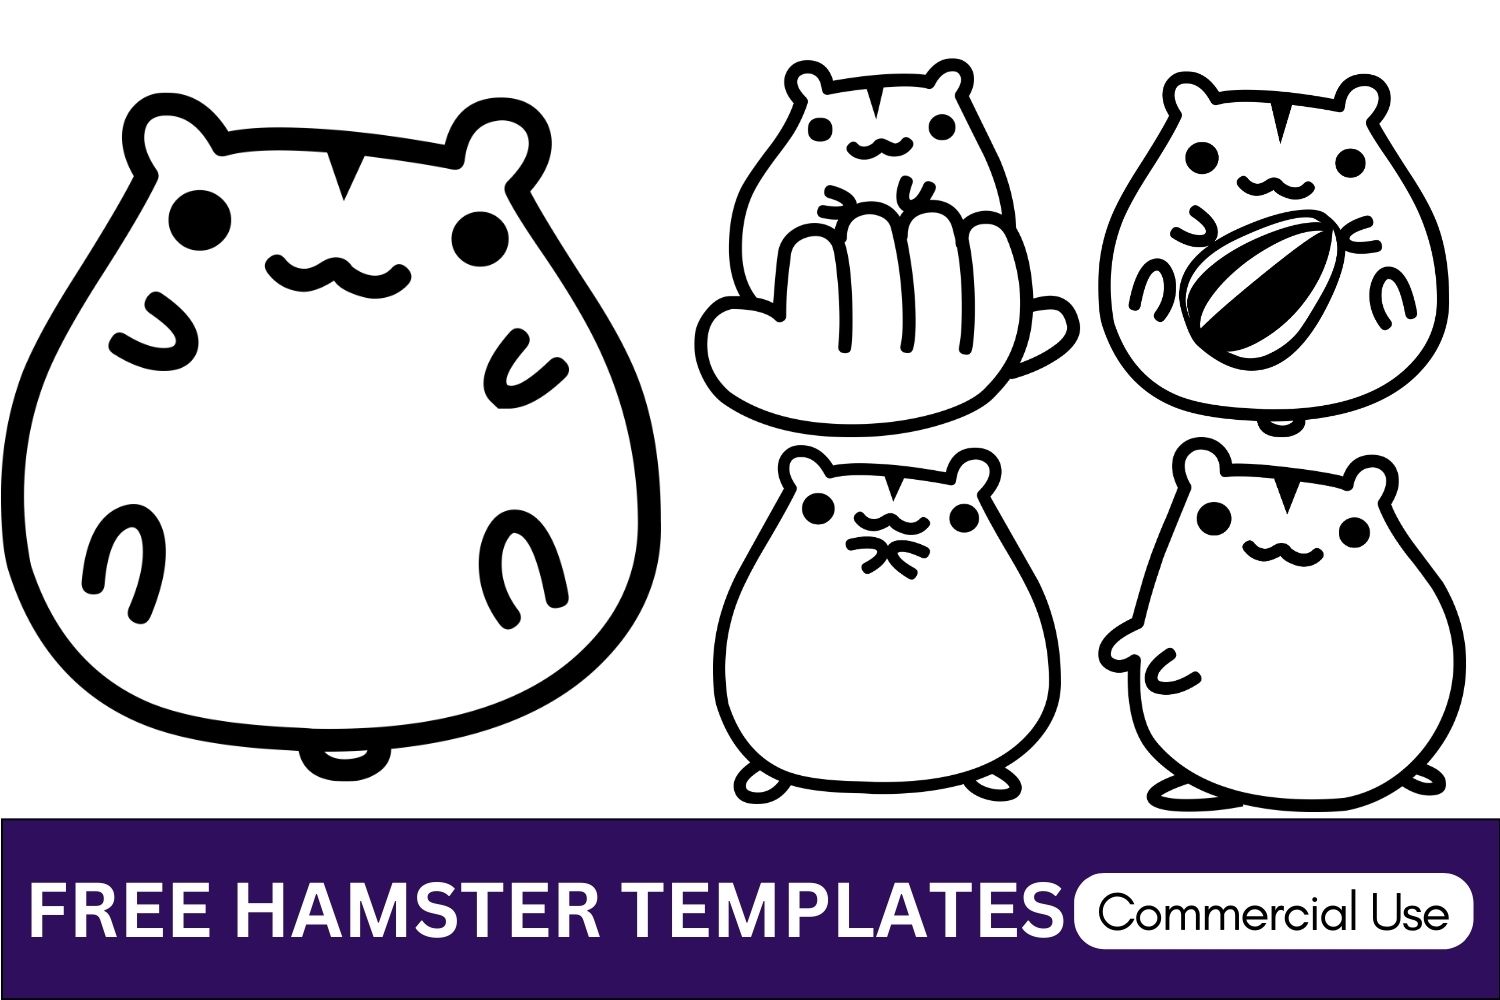 hamster templates, hamster svg, hamster printable, cricut cut files, Free, Download, cliparts, sihouette